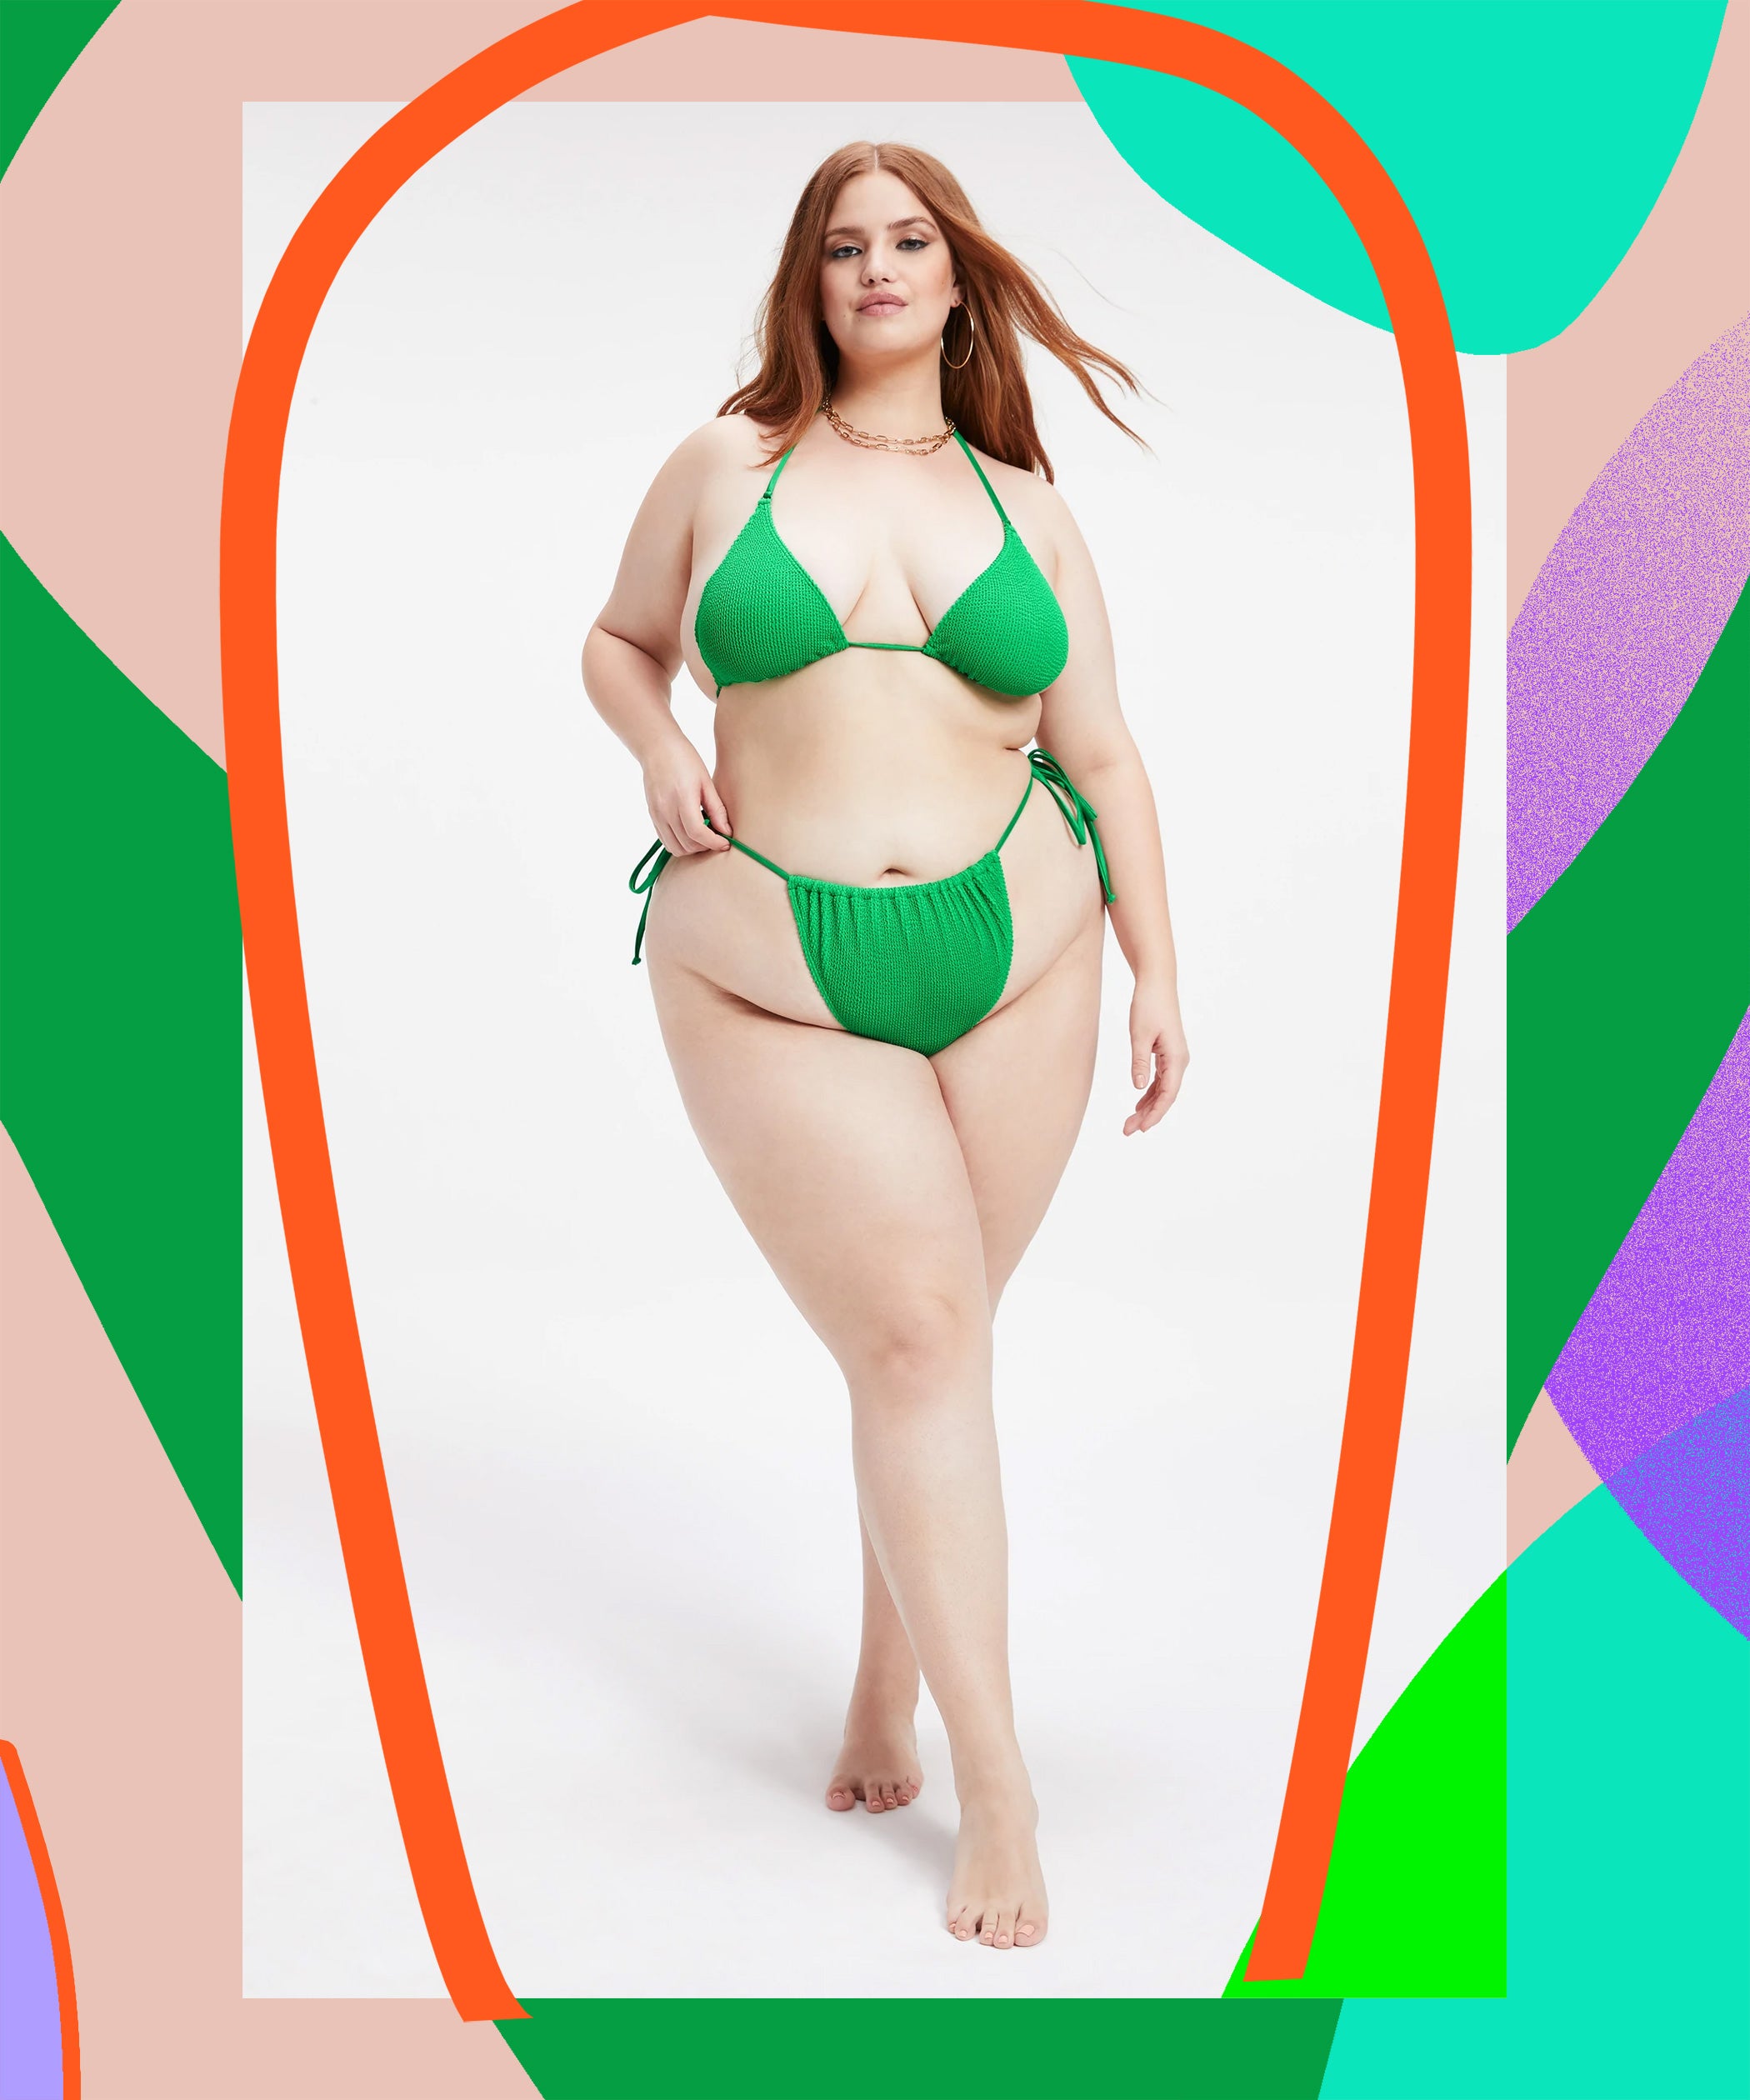 Larger Cup Sizes DD to H Cup Sized Swimwear